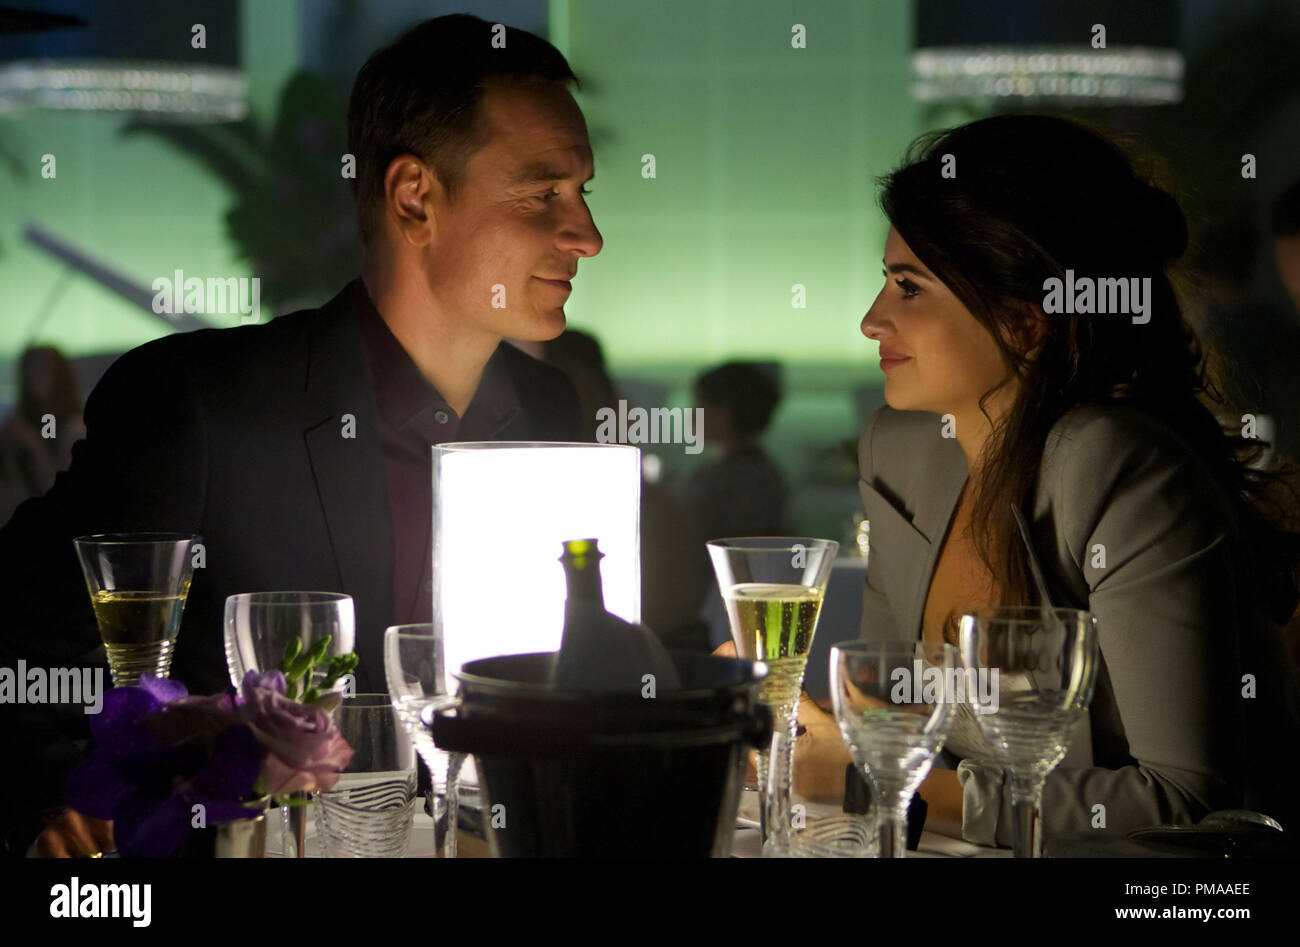 The Counselor (Michael Fassbender) and Laura (Penelope Cruz) enjoy a romantic evening. Stock Photo